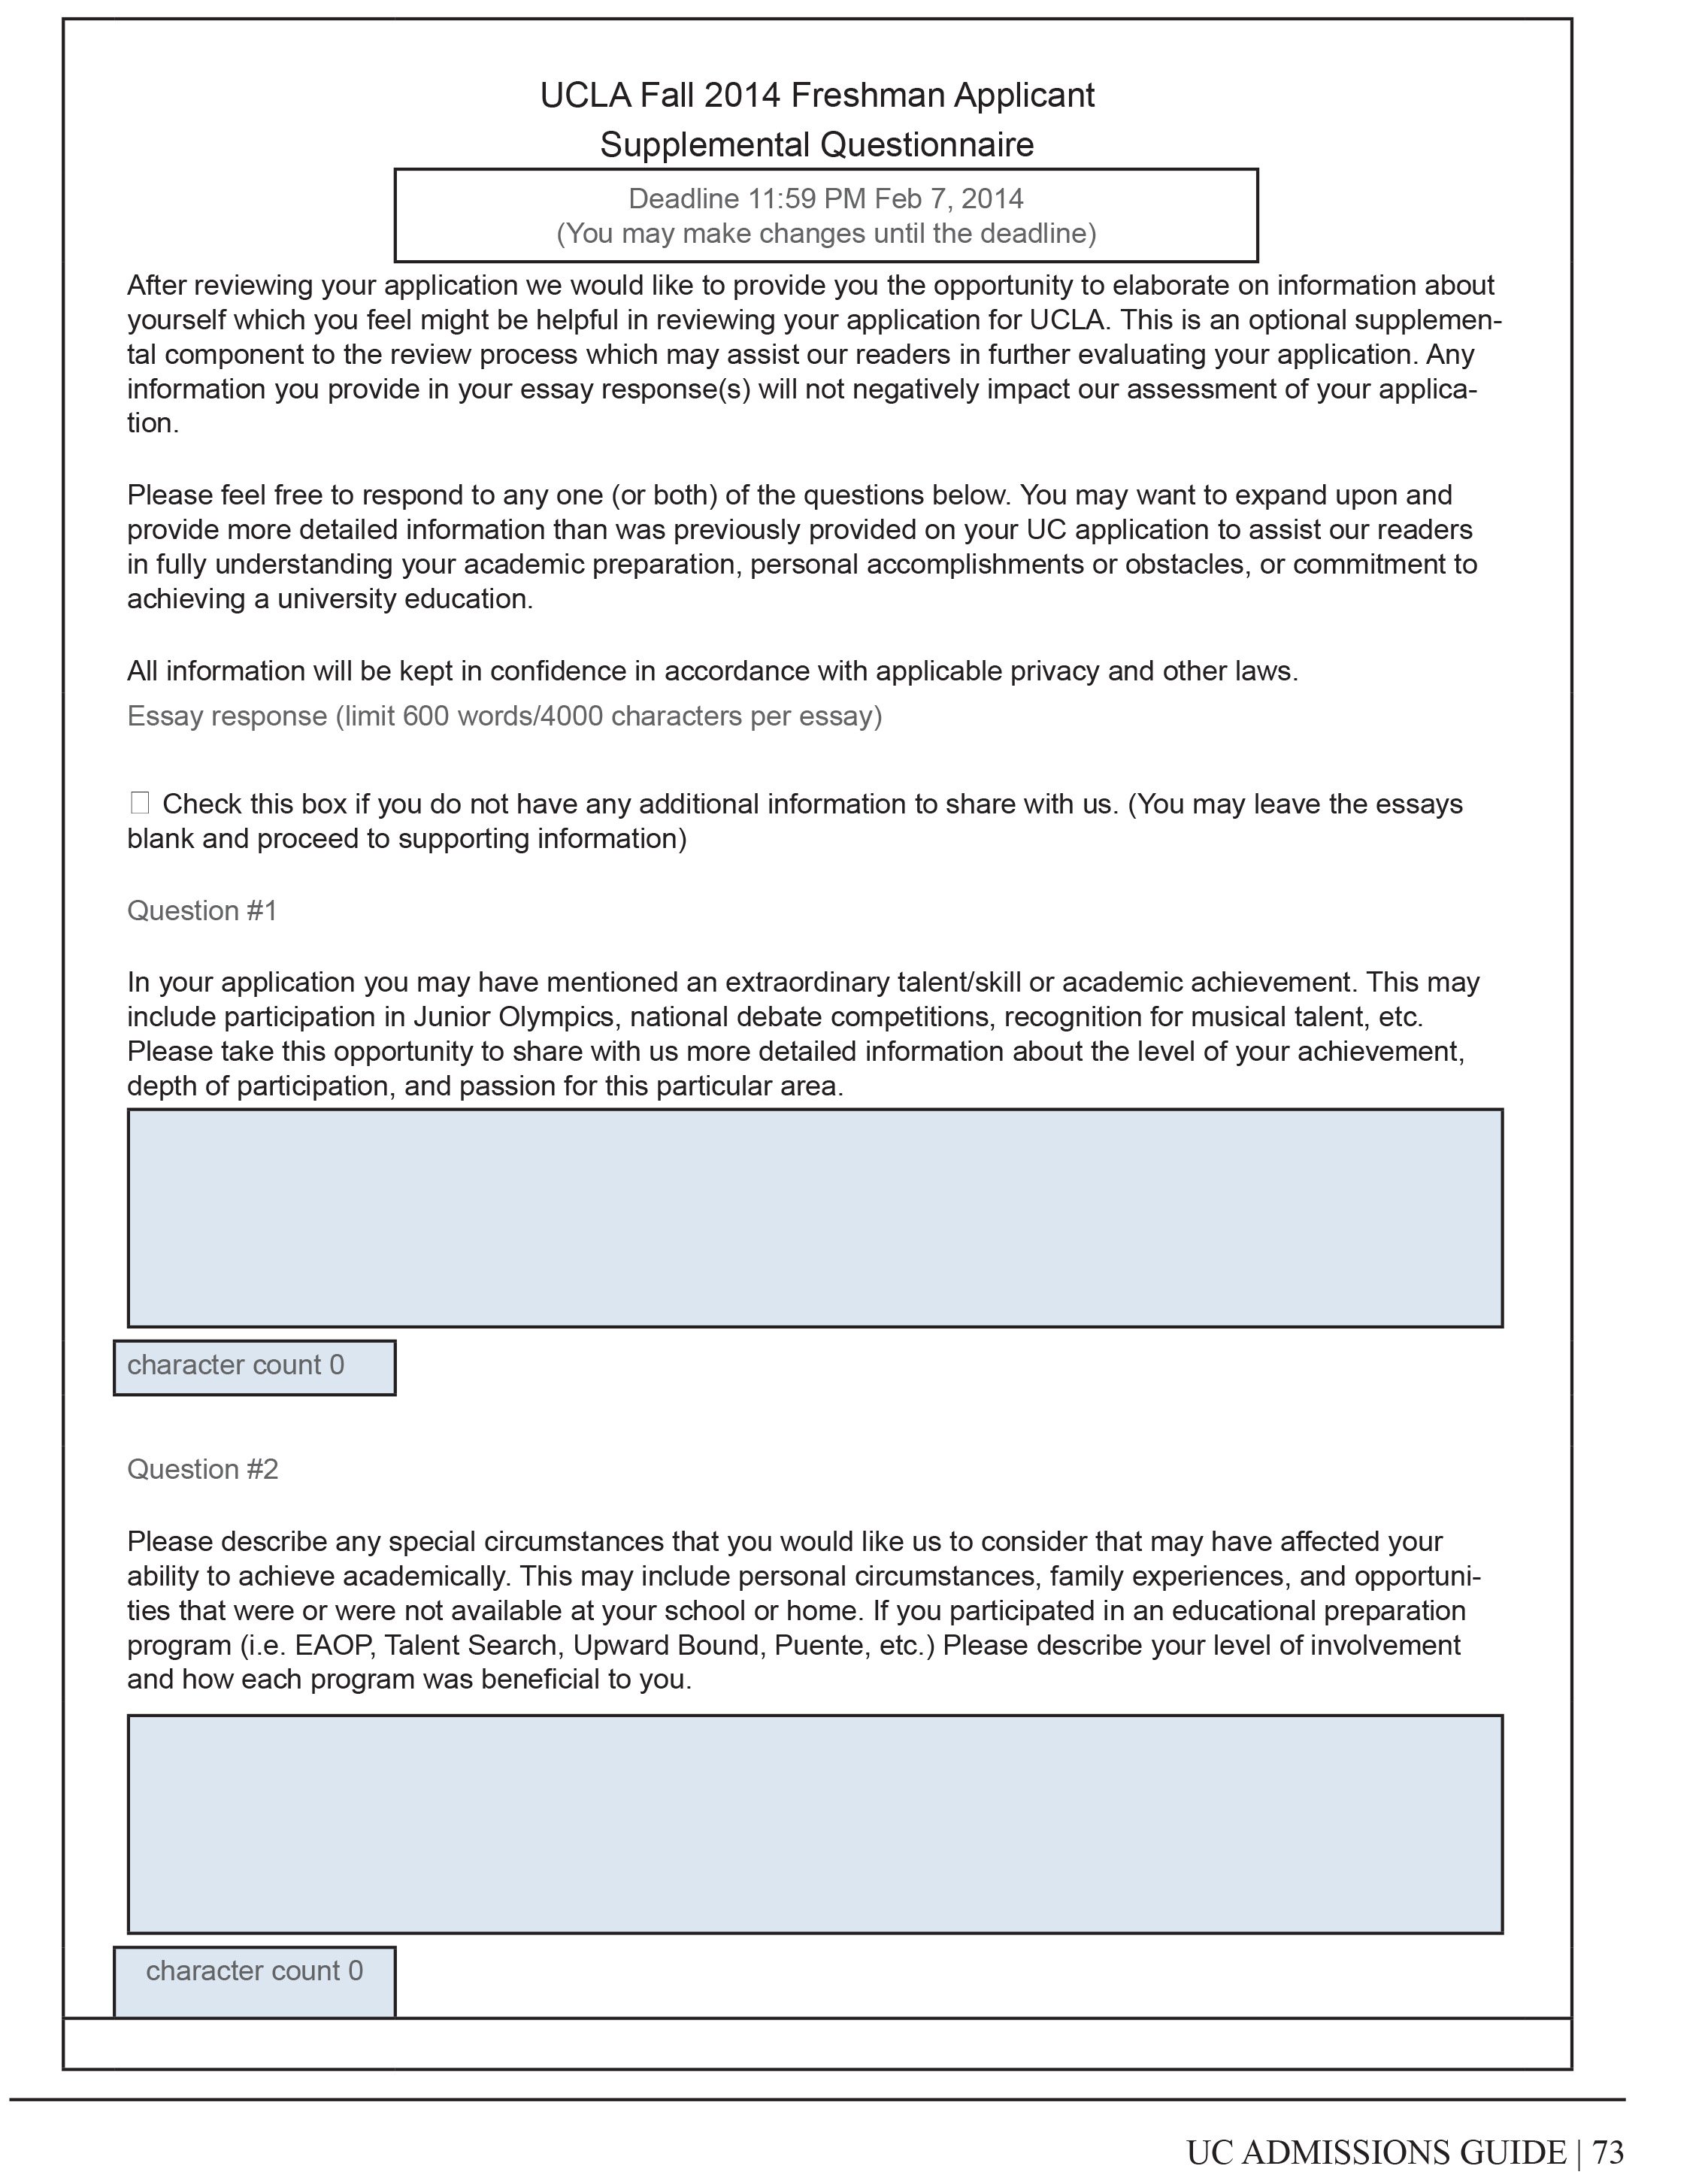 Dissertation writing for payment questionnaire